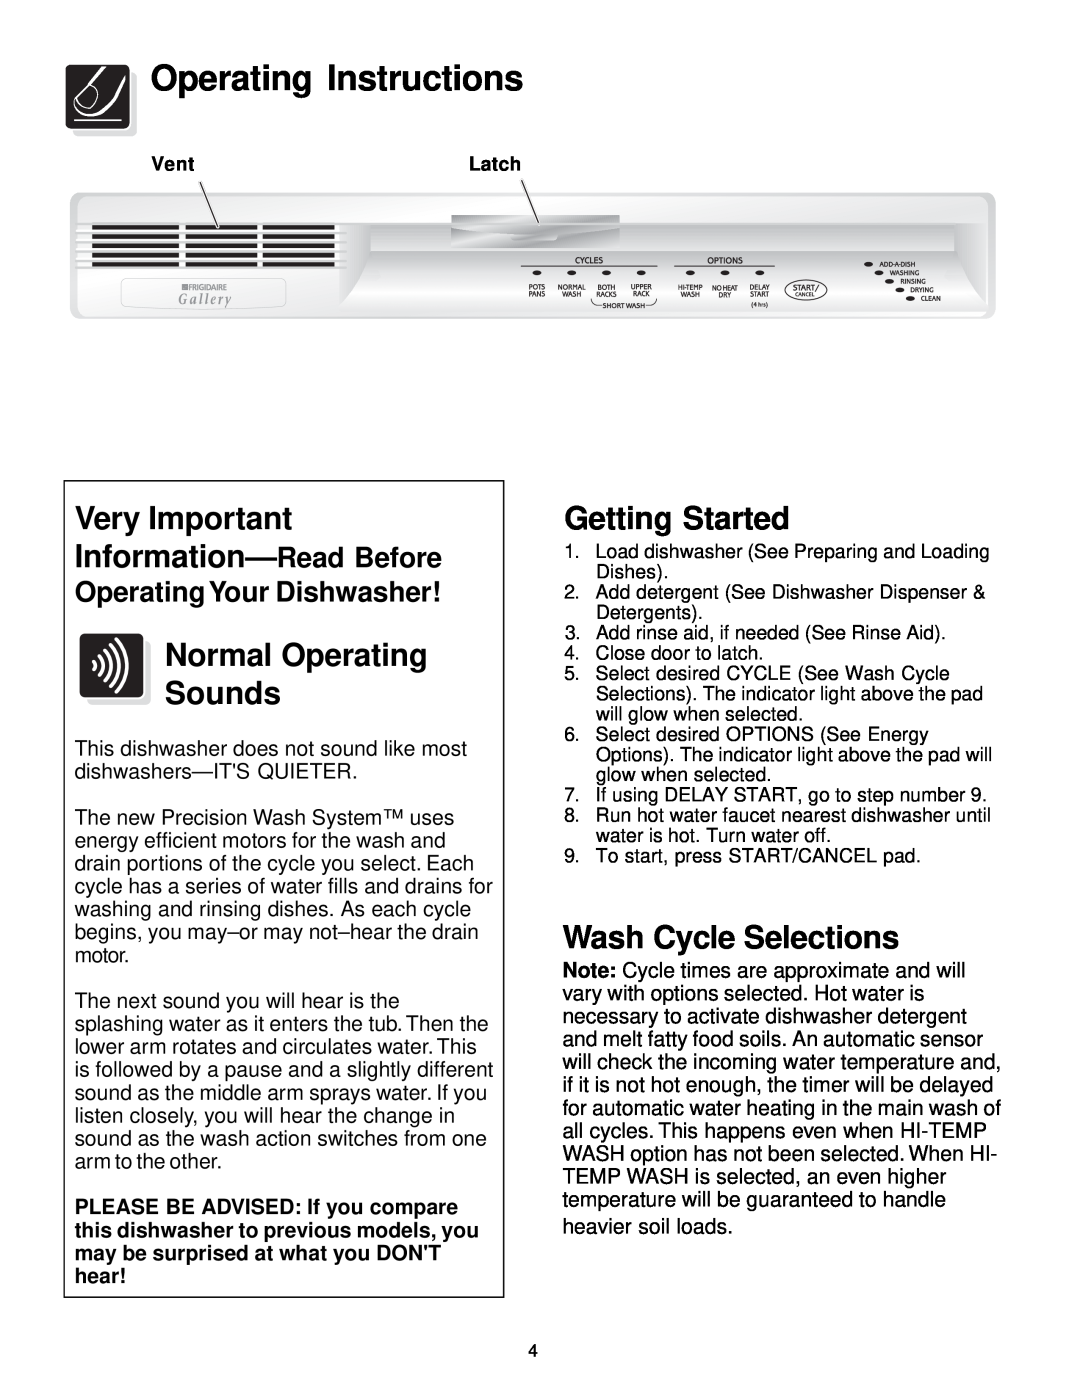 Frigidaire FDB836 manual Operating Instructions, Very Important Information- Read Before, Normal Operating Sounds 